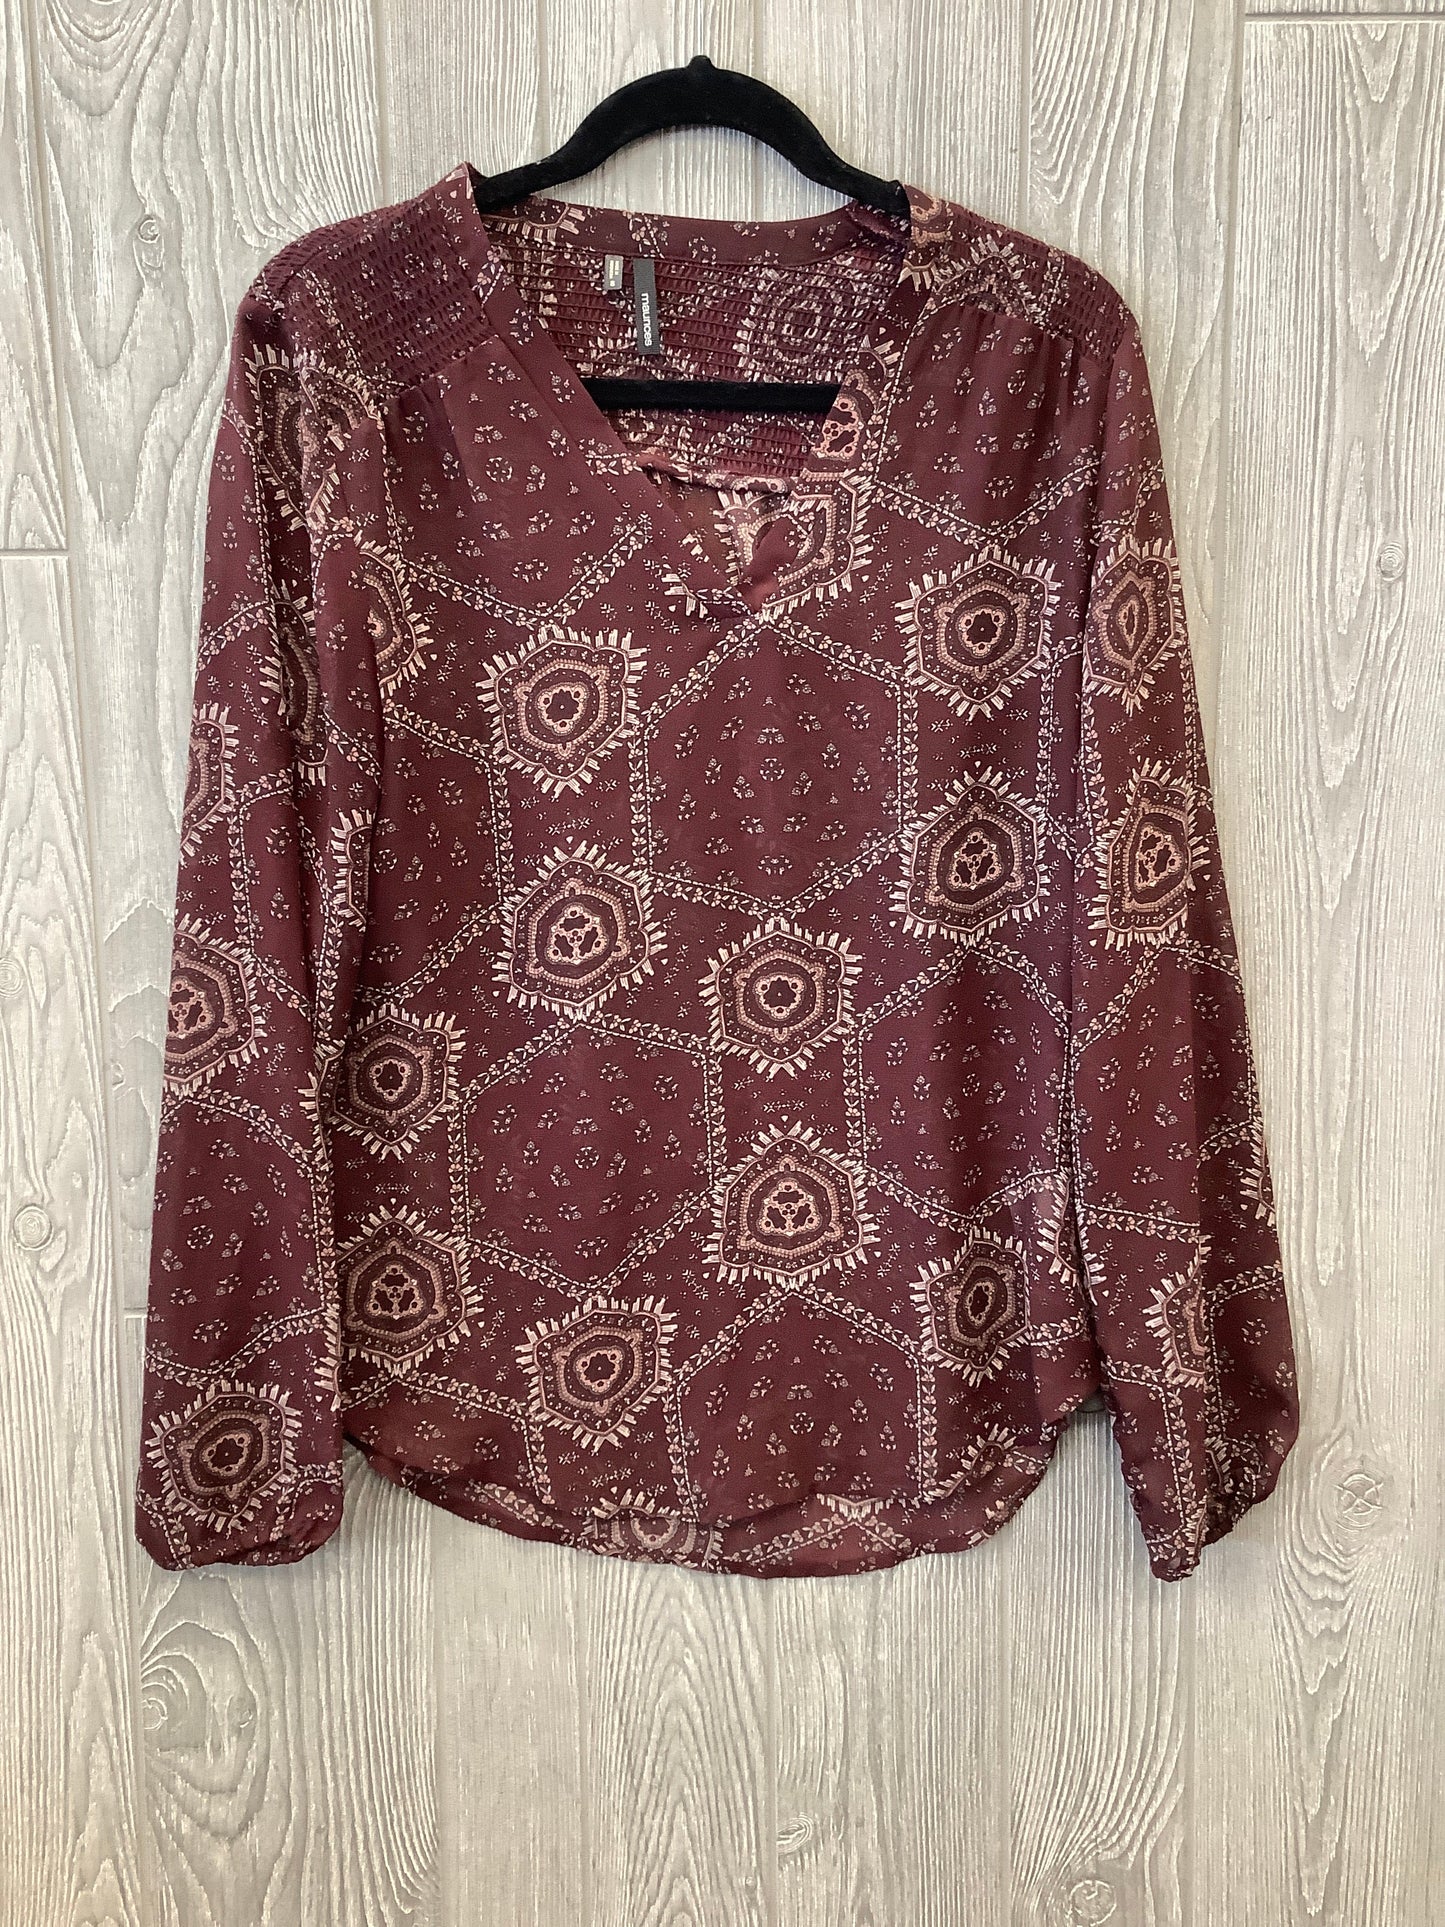 Purple Top Long Sleeve Maurices, Size S